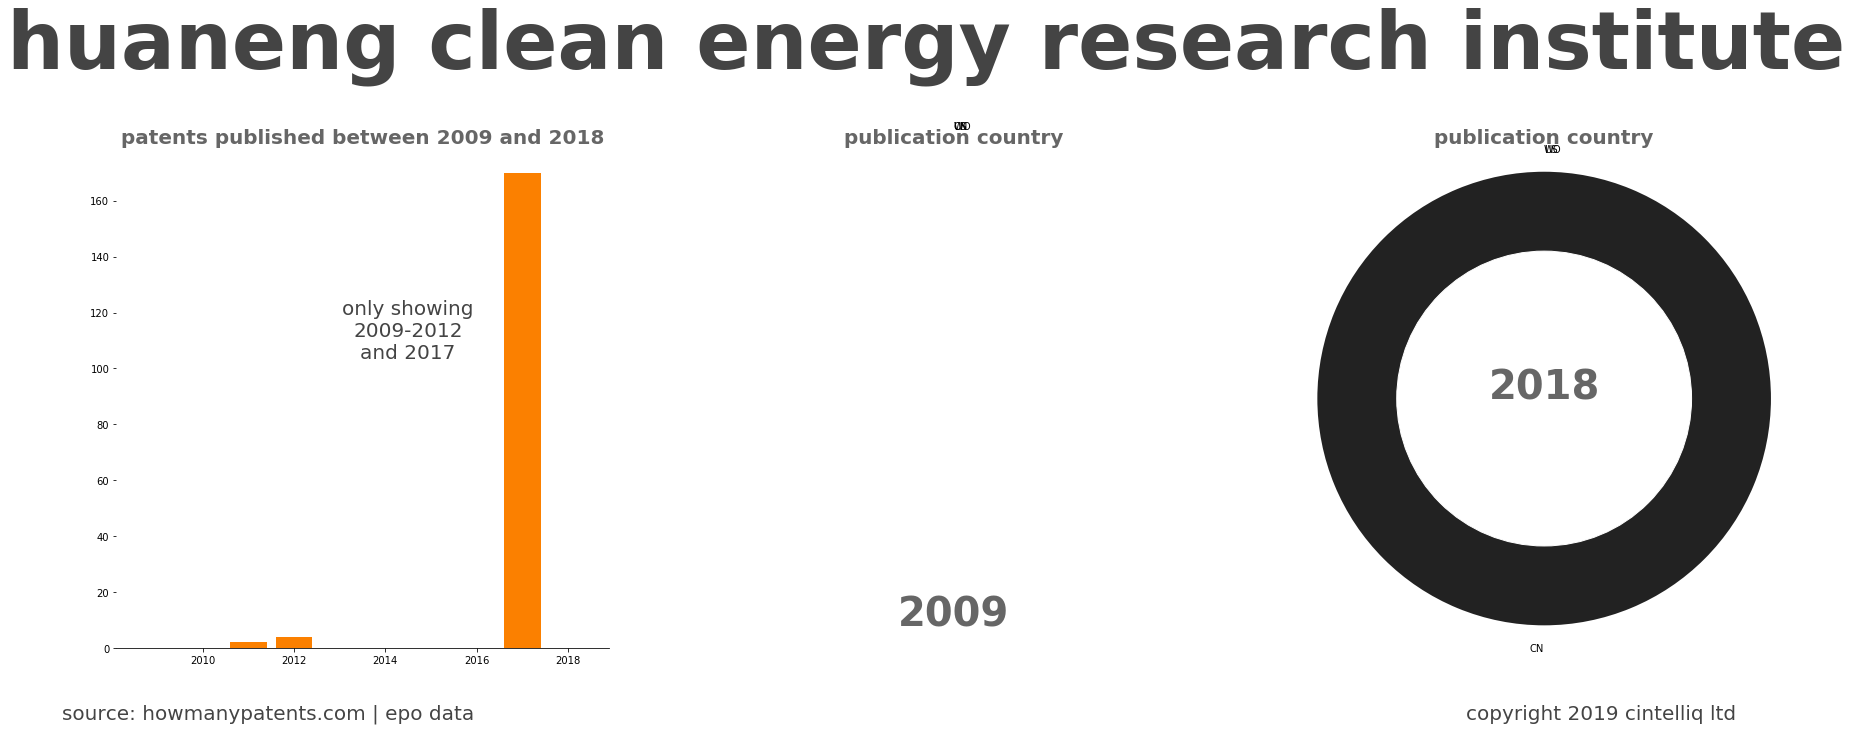 summary of patents for Huaneng Clean Energy Research Institute